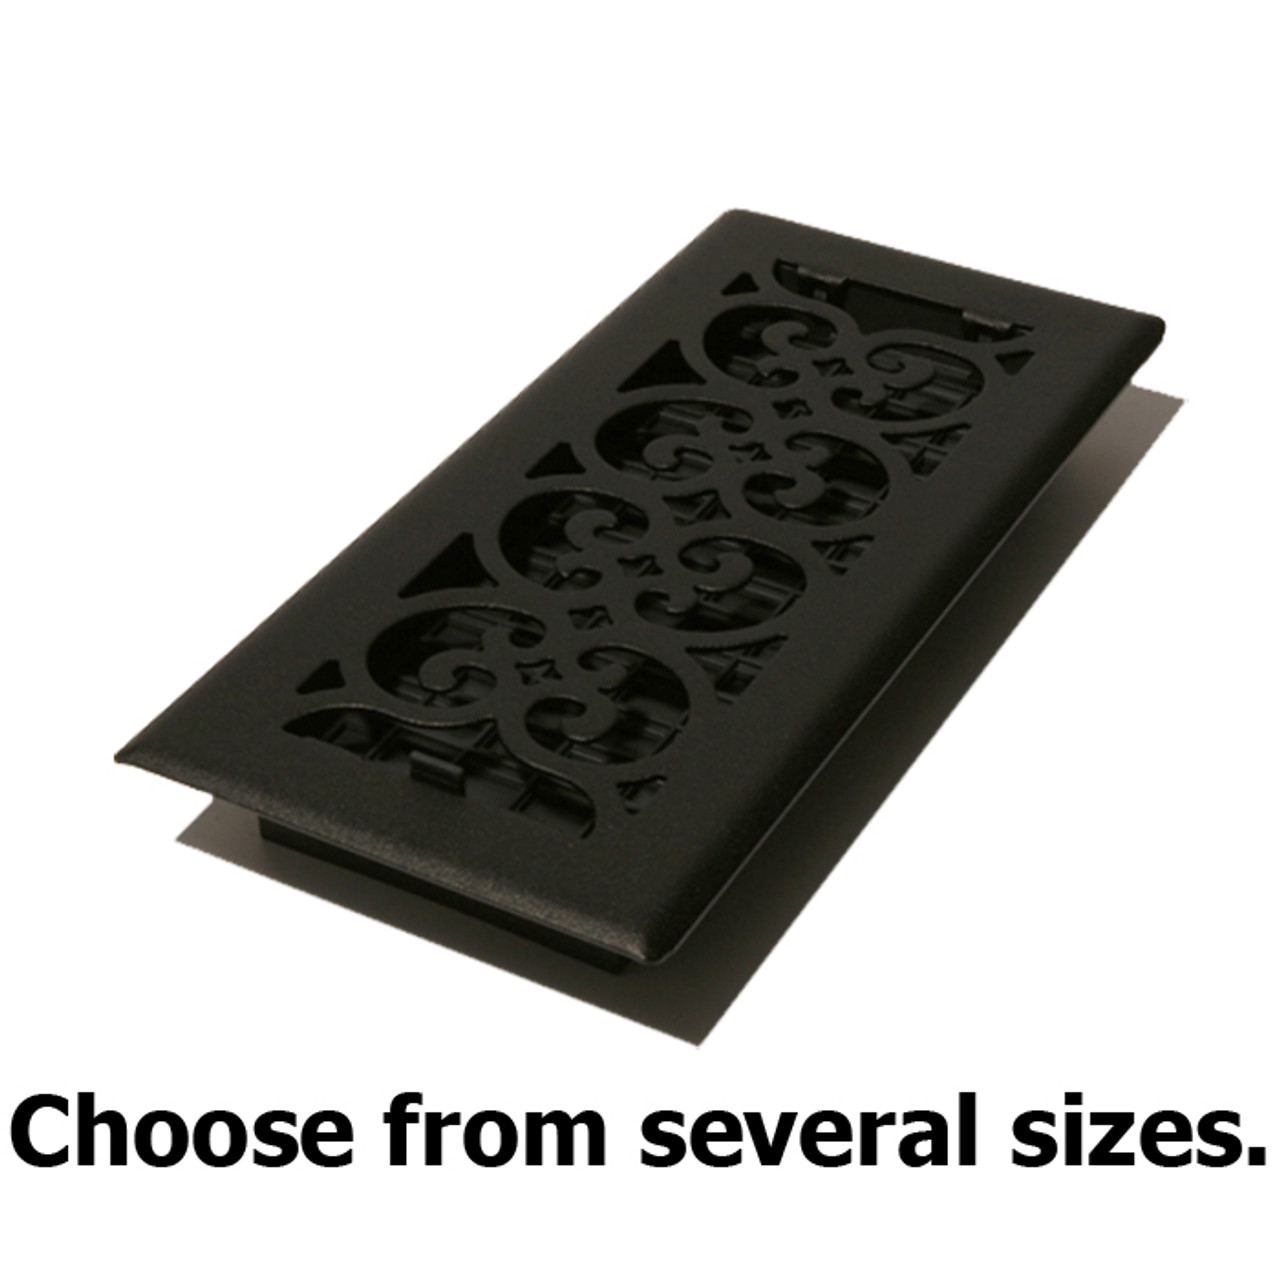 Cast Iron Look Black Floor Register Vent Covers By Decor Grates By